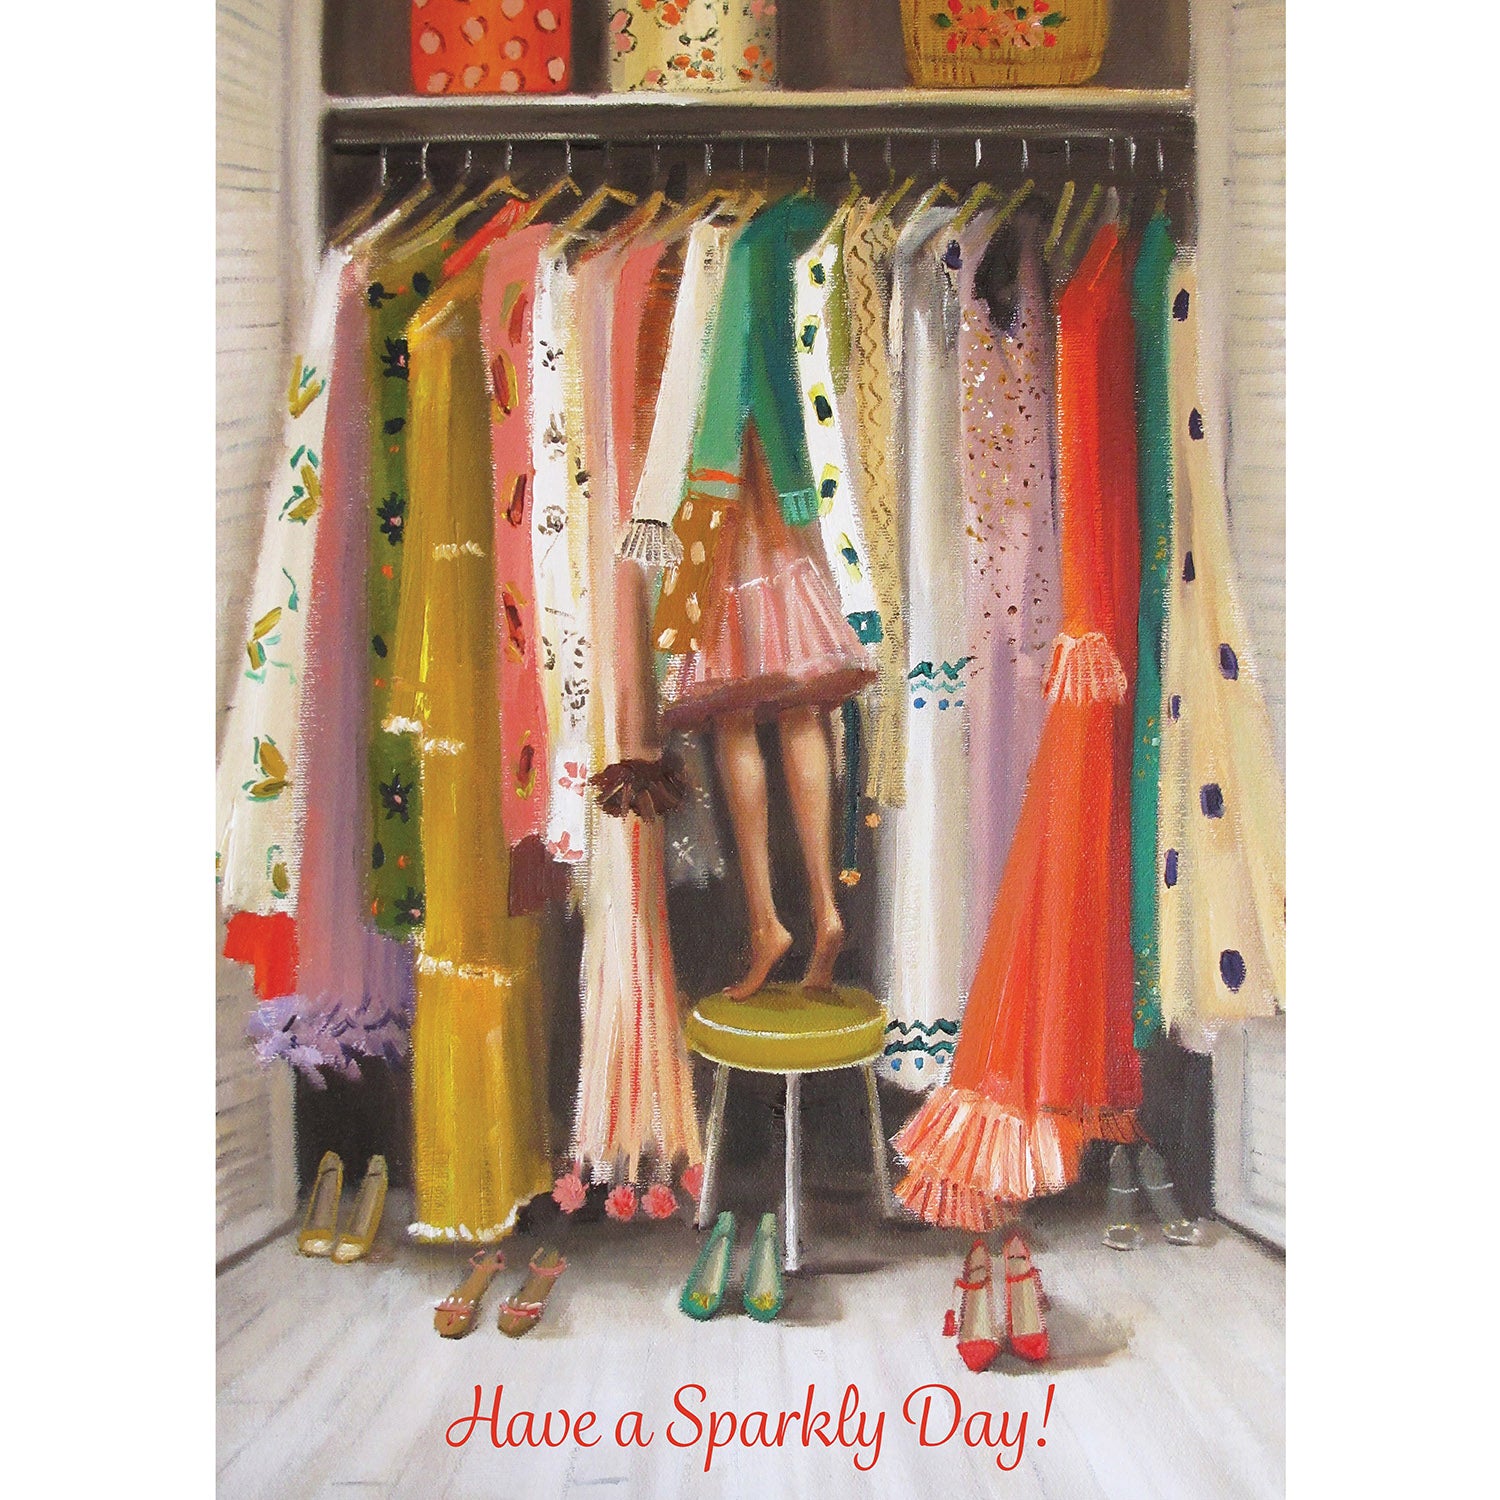 A painterly illustration of a closet packed with colorful vintage dresses, with a young girl&